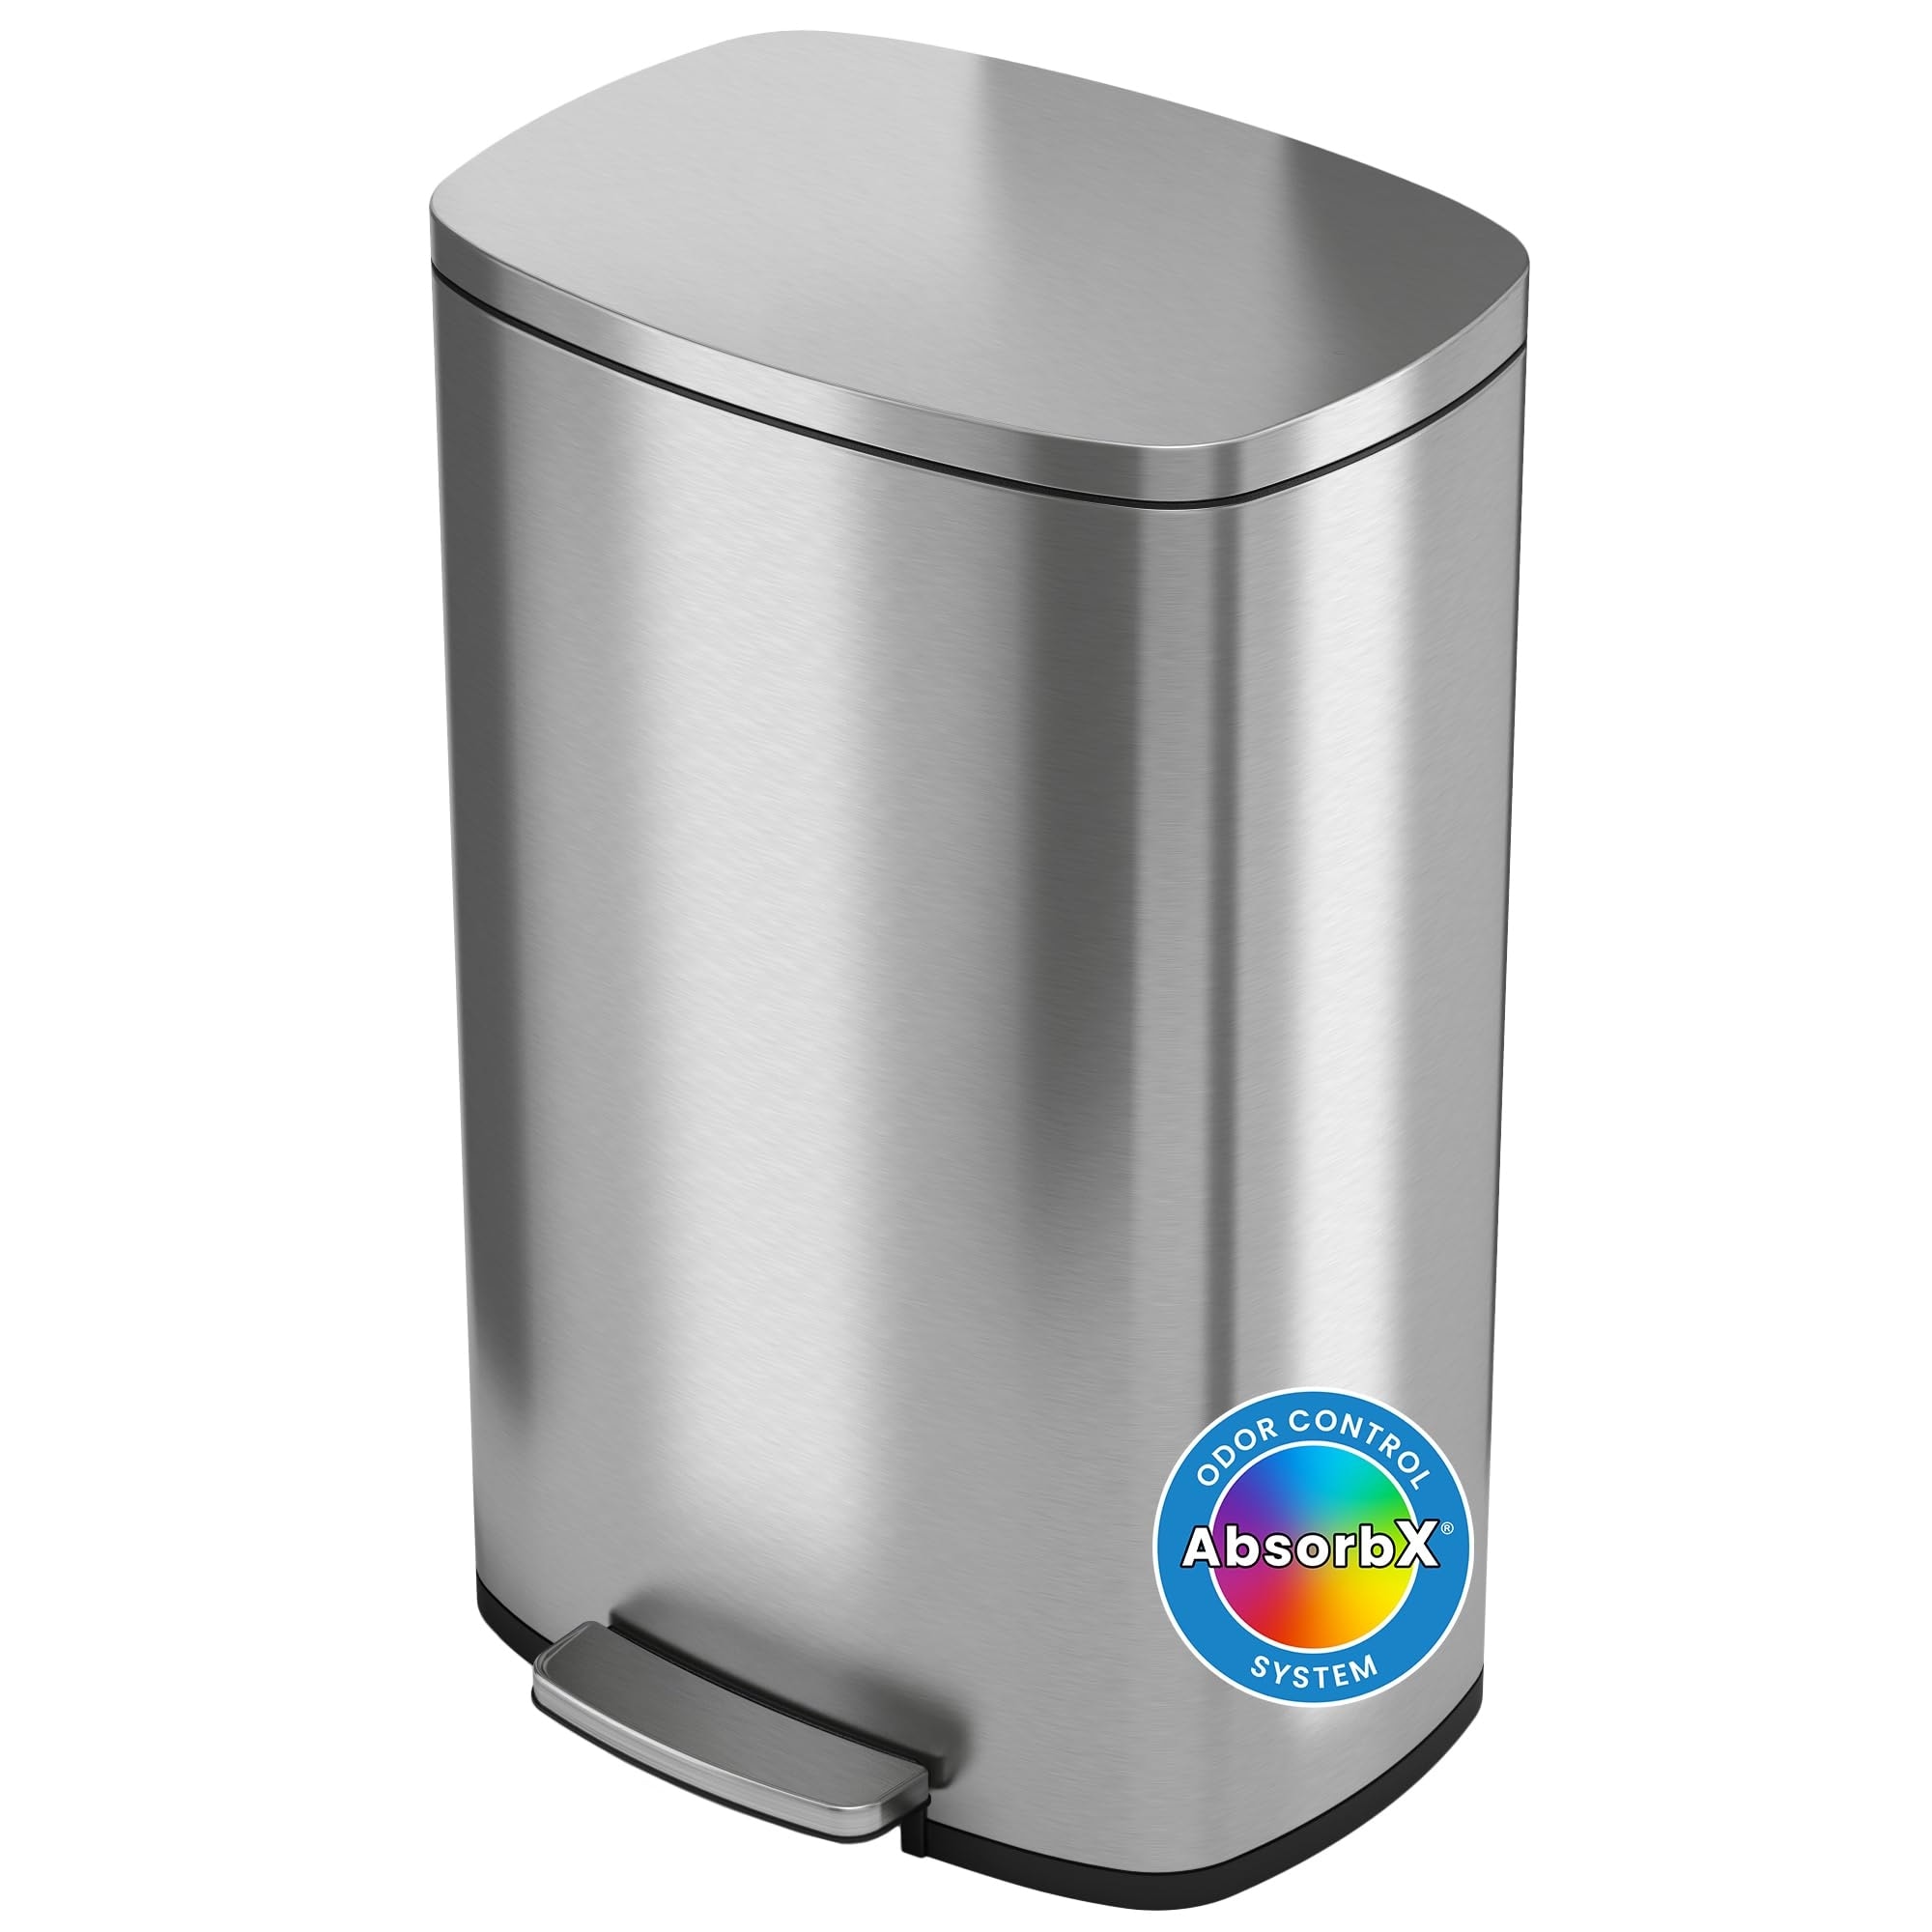 https://ak1.ostkcdn.com/images/products/is/images/direct/b7a0b48404cbc2e623f0245c2f001fc2c885714a/13.2-Gallon-Step-Trash-Can-with-Odor-Filter-System%2C-Stainless-Steel-50-Liter-Pedal-Garbage-Bin%2C-Silent-and-Gentle-Lid-Close.jpg